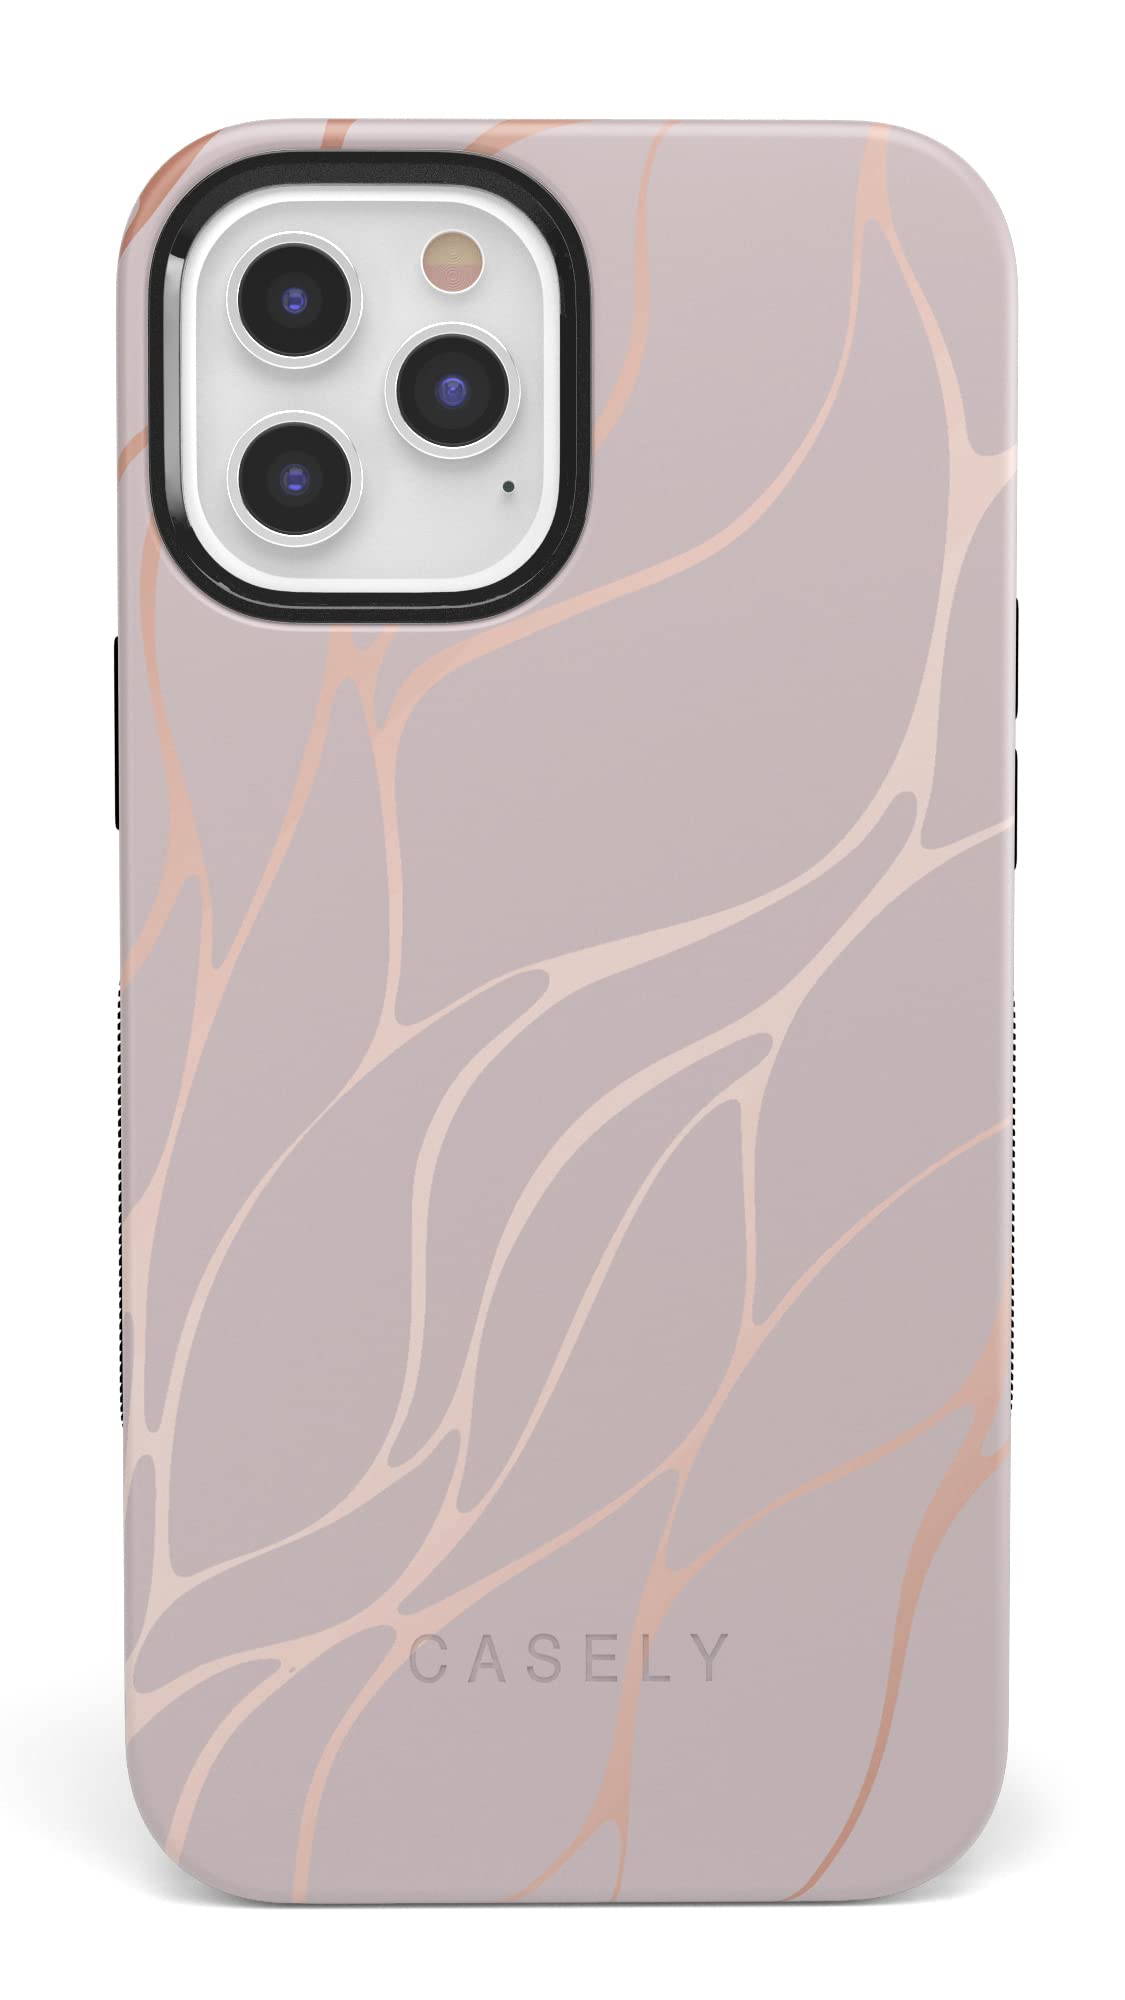 Casely Iphone 12 Pro Max Phone Case Pink And Gold Metallic Waves Case 360 Degree Coverage For Your Phone Precise Cutouts, 1Mm Ra